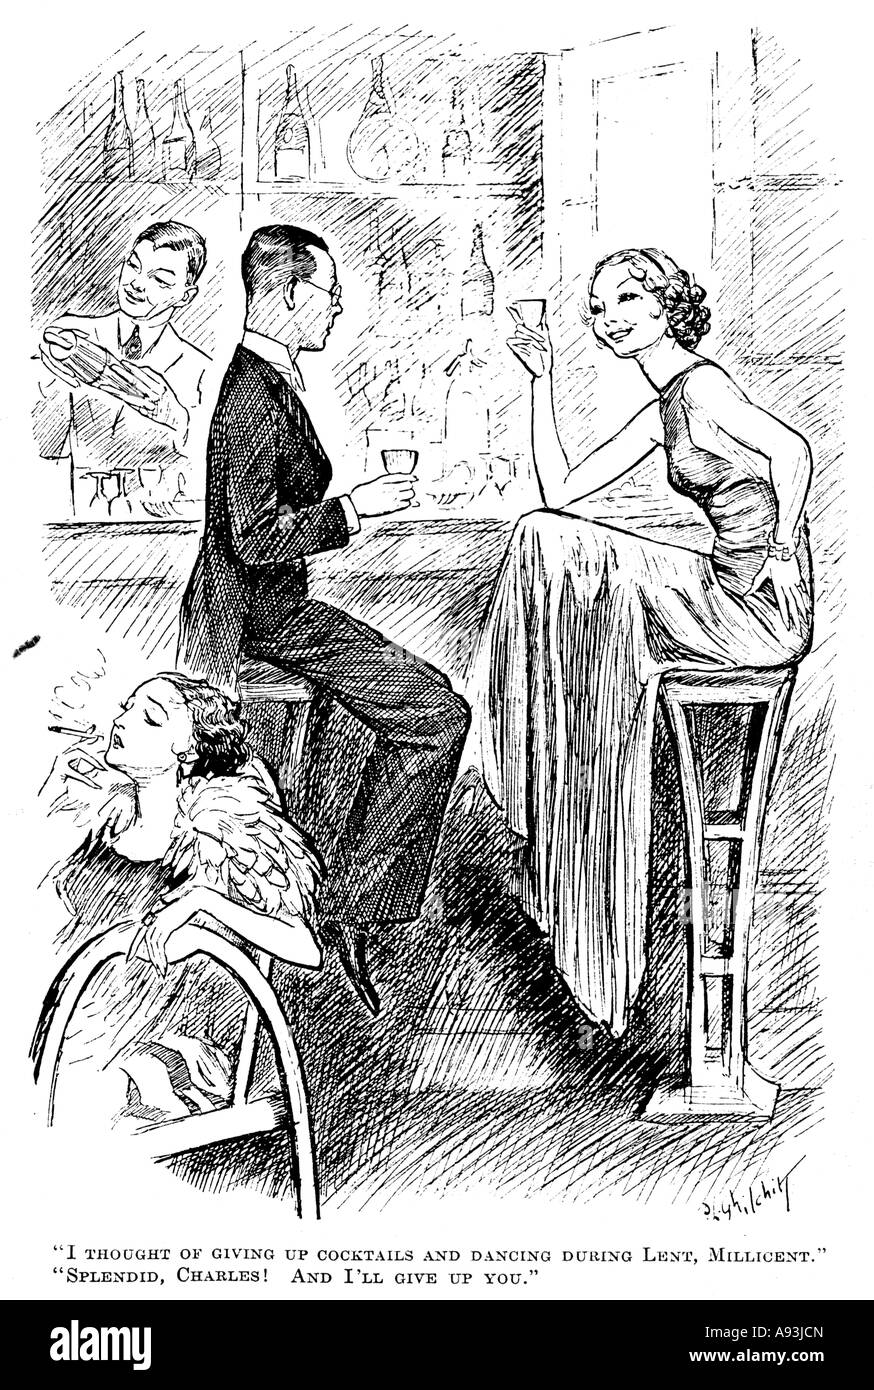 No Fun For Lent I thought of giving up cocktails and dancing during Lent and Ill give up on you 1934 cartoon Stock Photo